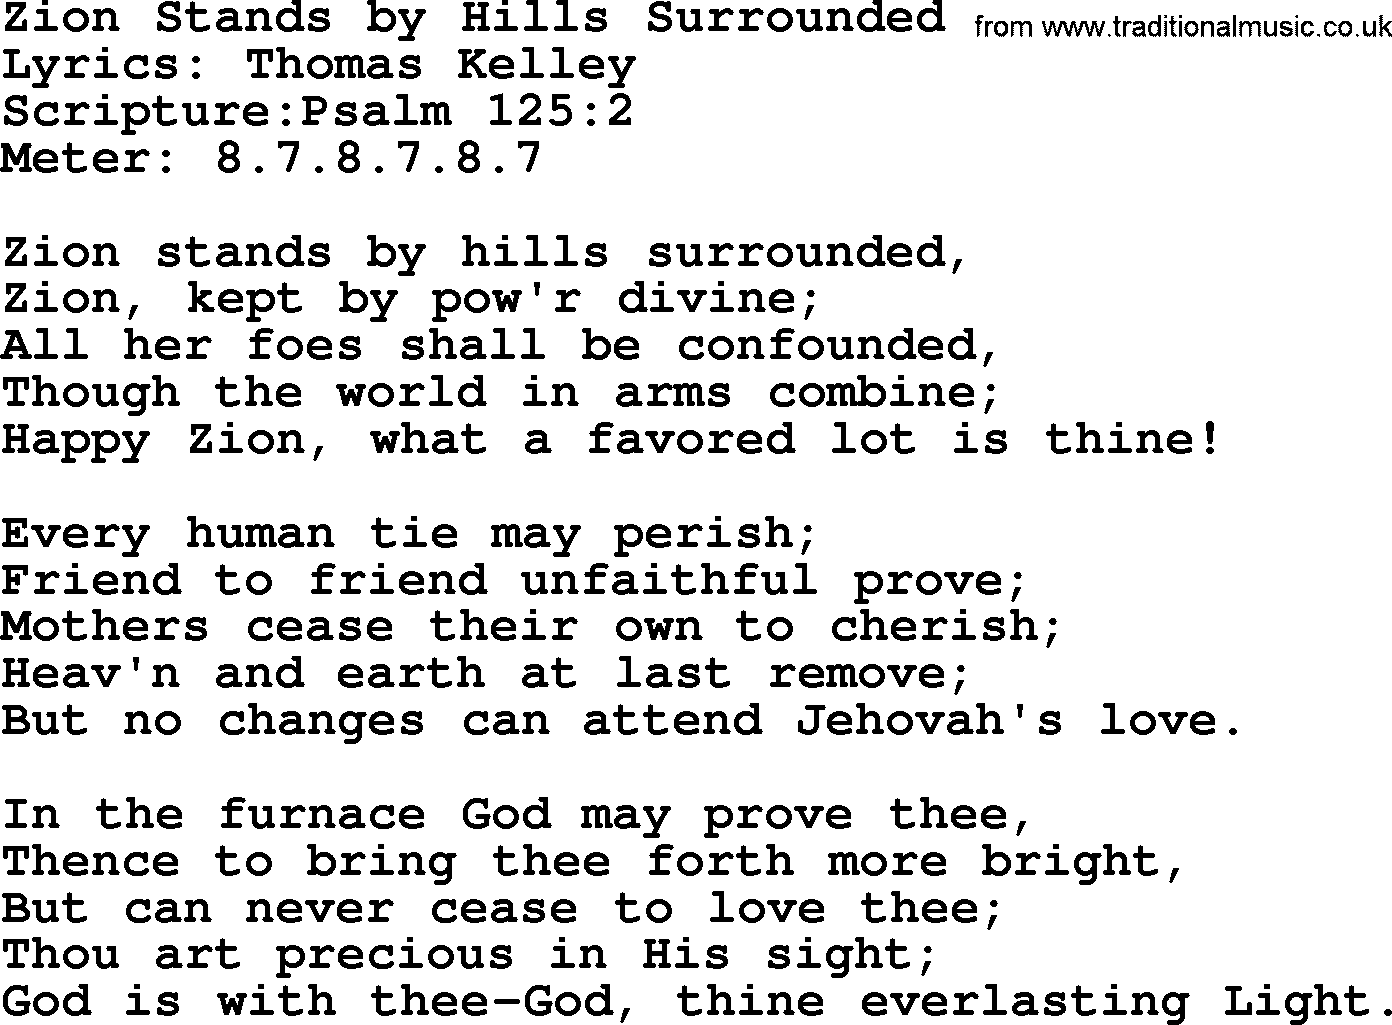 Hymns about  Angels, Hymn: Zion Stands by Hills Surrounded, lyrics, sheet music, midi & Mp3 music with PDF